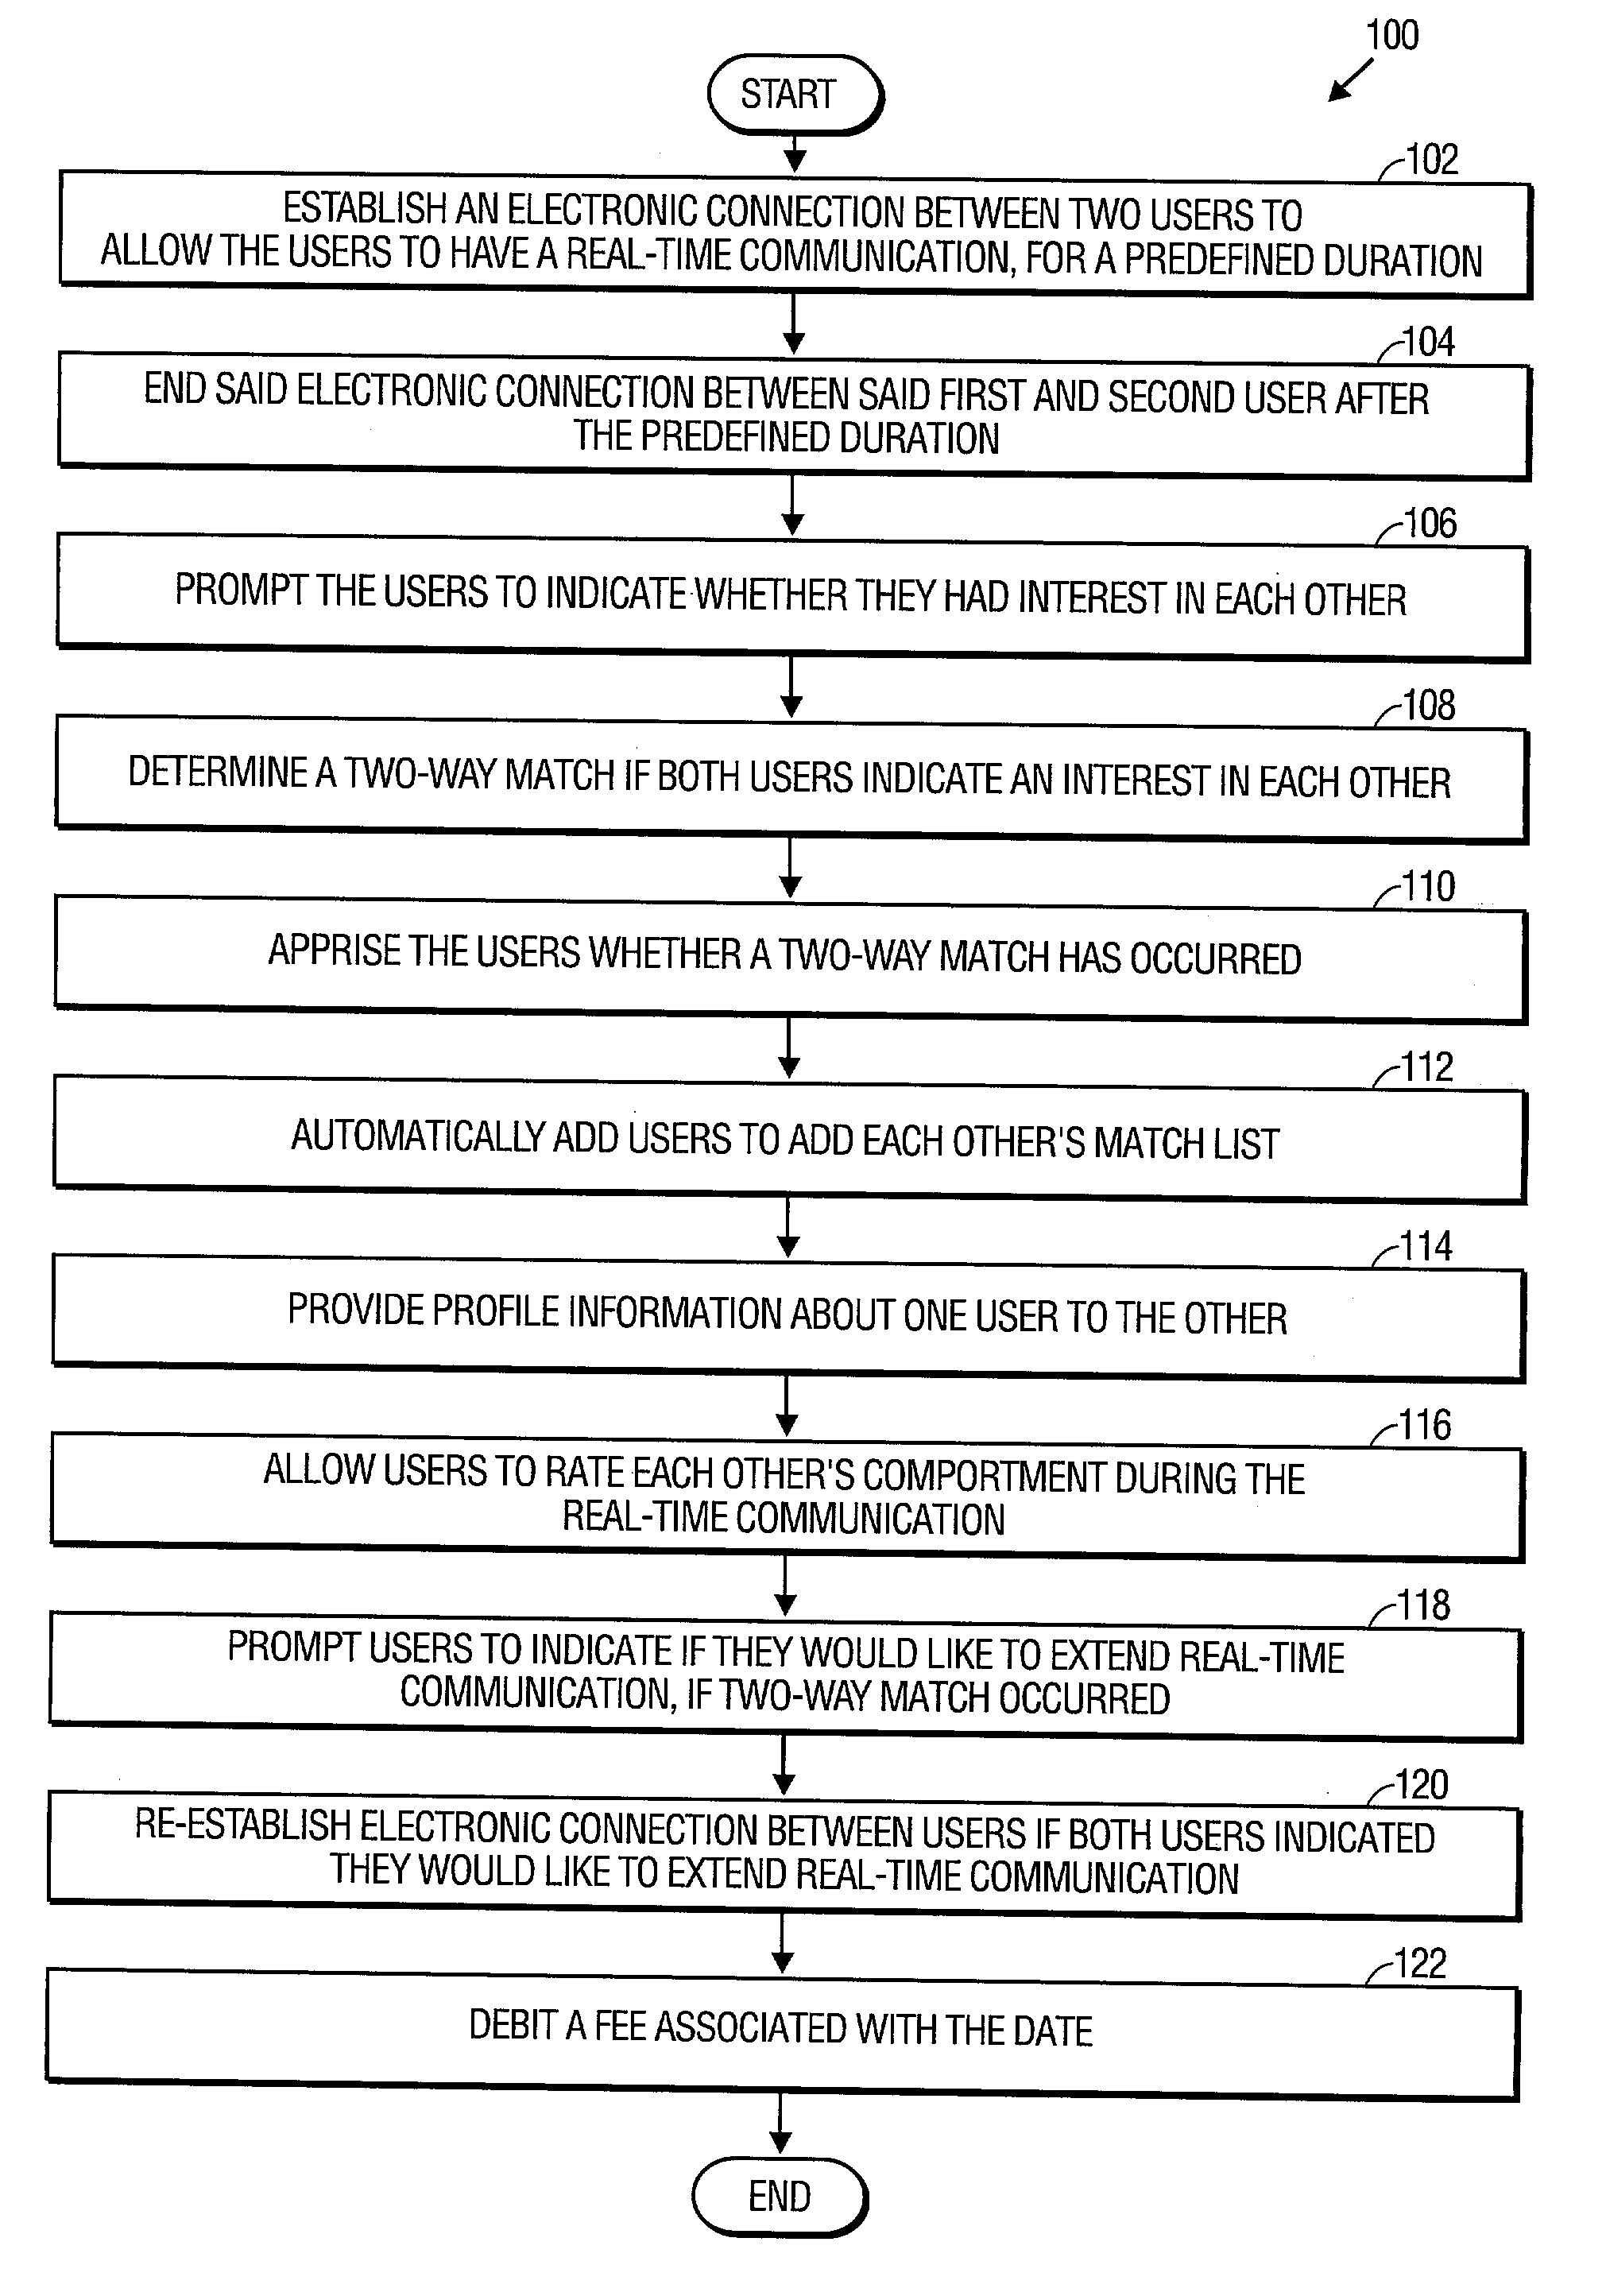 Method and system to connect and match users in an electronic dating service